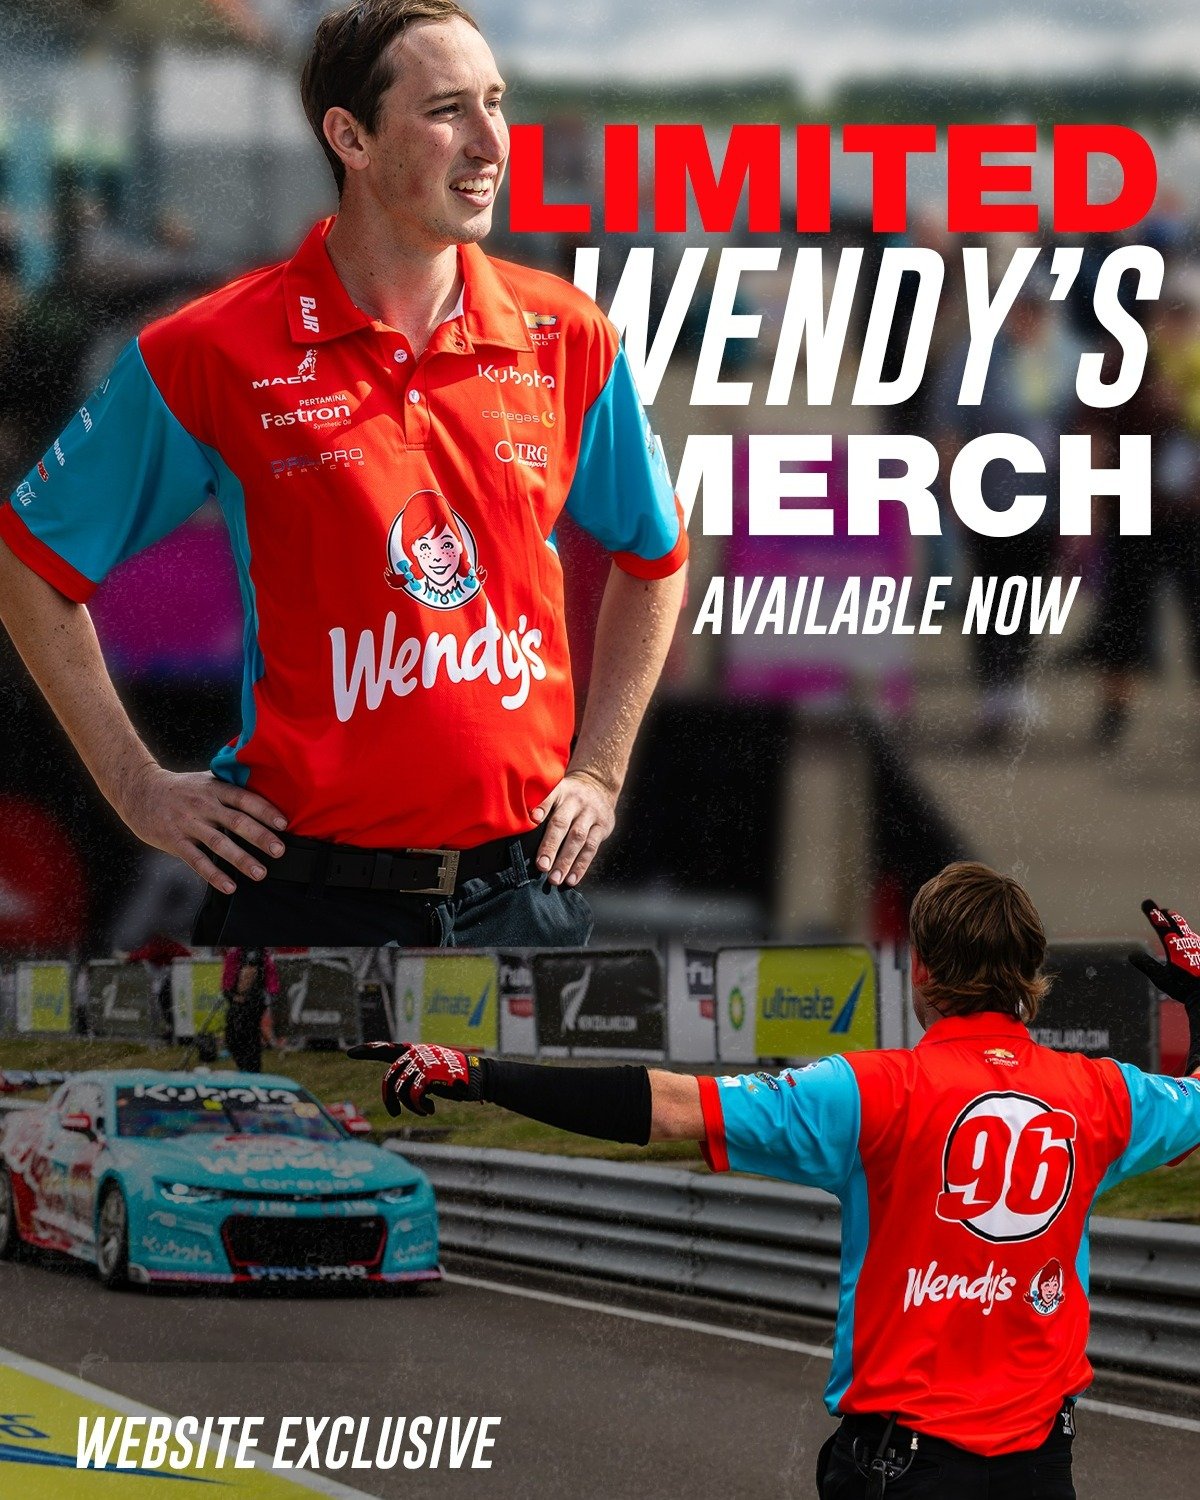 If you loved and miss the Wendy's livery as much as us you can grab limited edition merchandise now!

ONLY available on our website, link in our bio. 

#BJRcrew | #RepcoSC | #Supercars